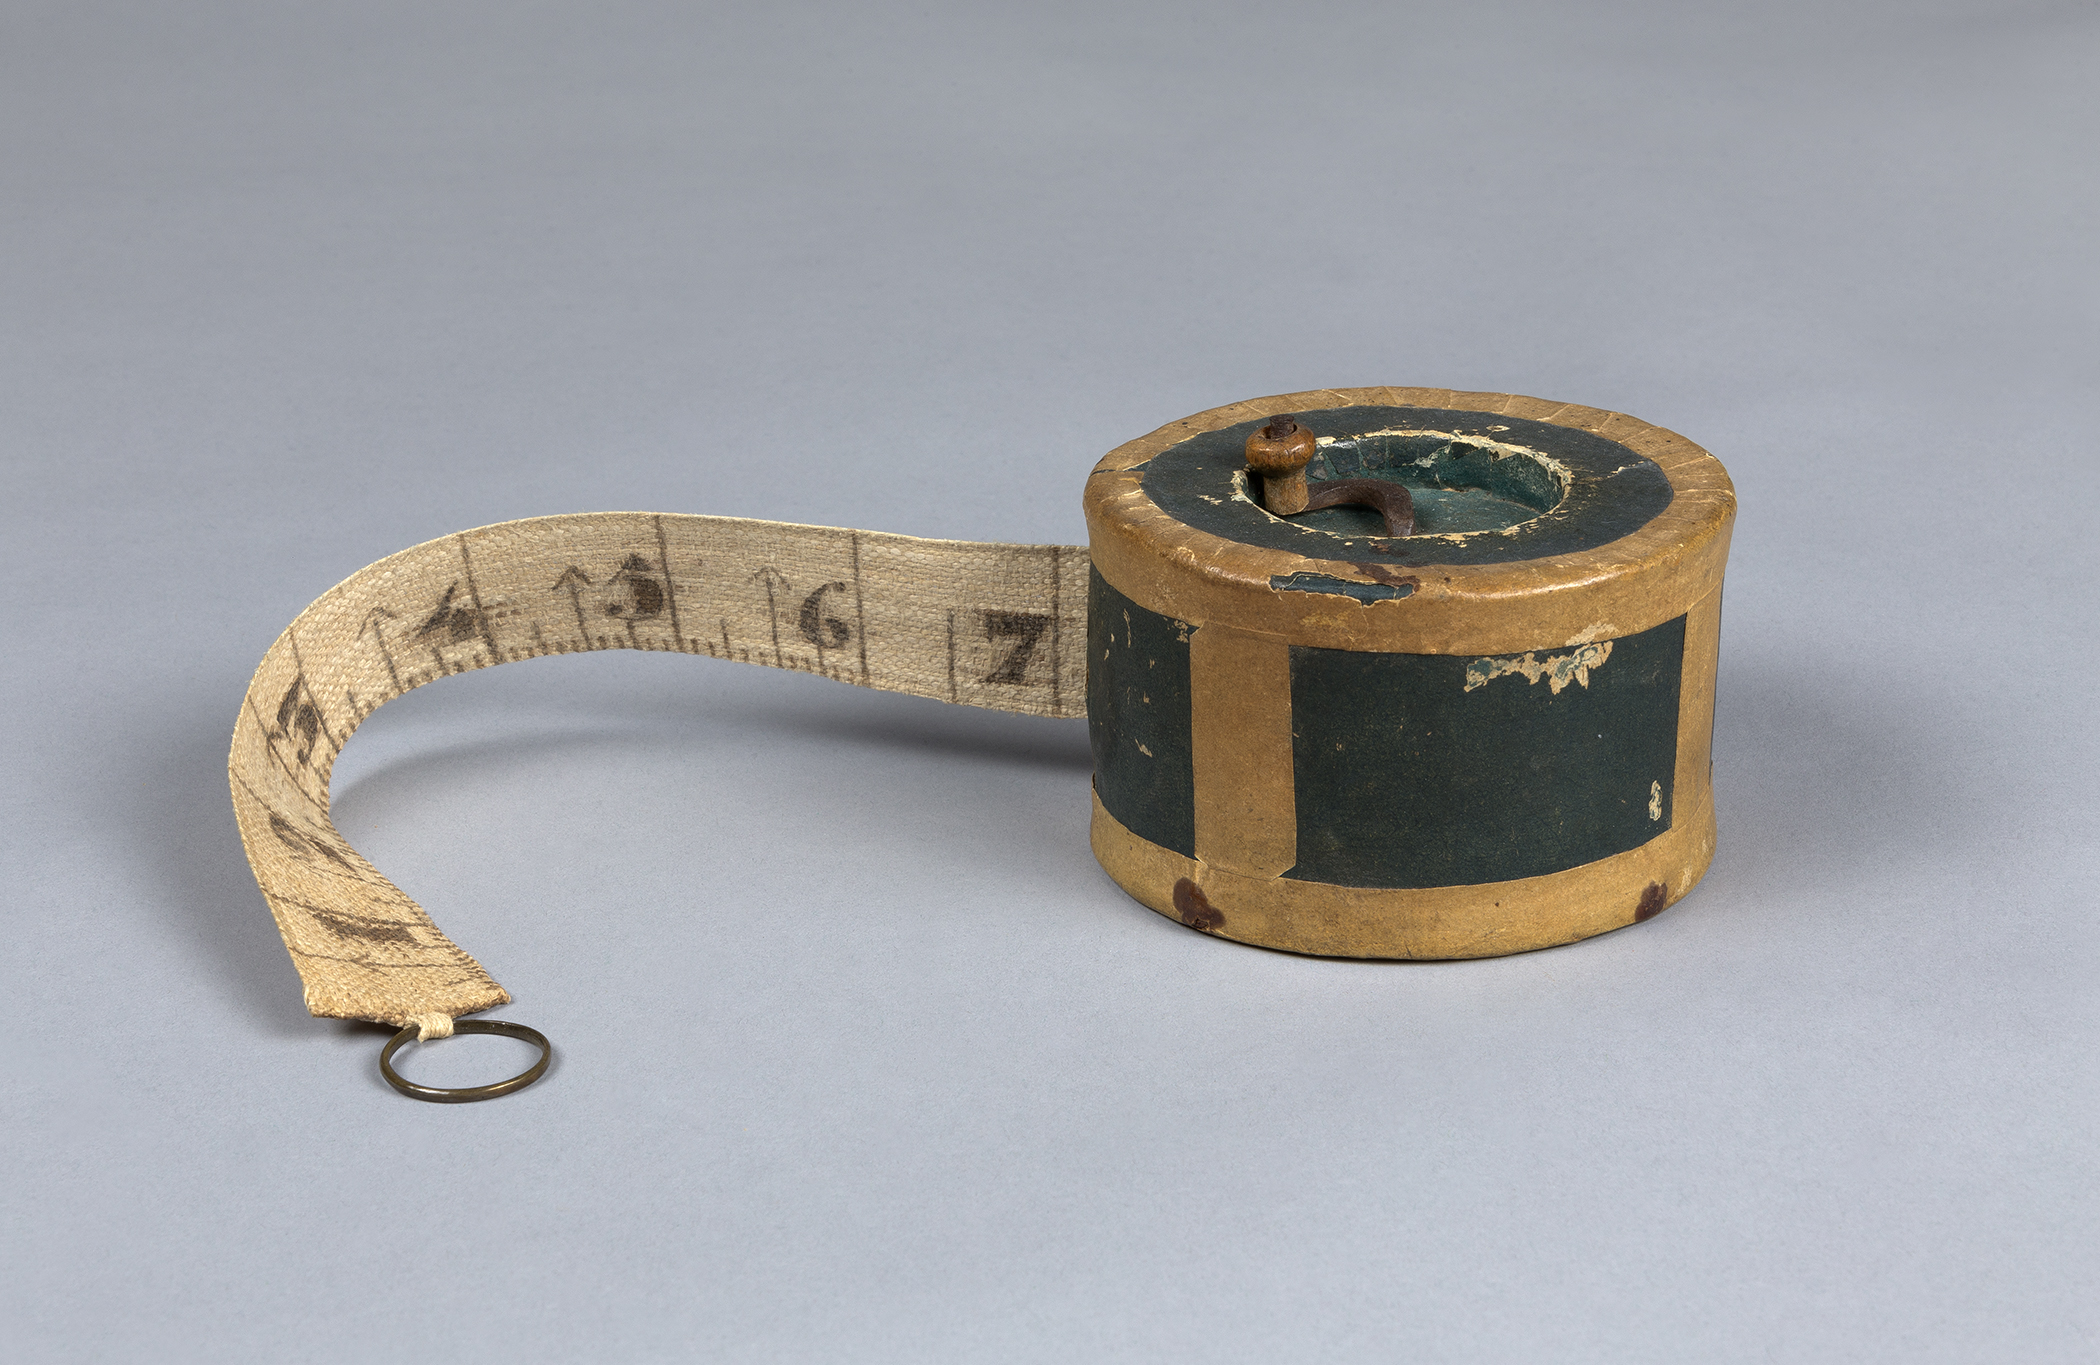 1954.0012.001 Box with measuring tape, view 1